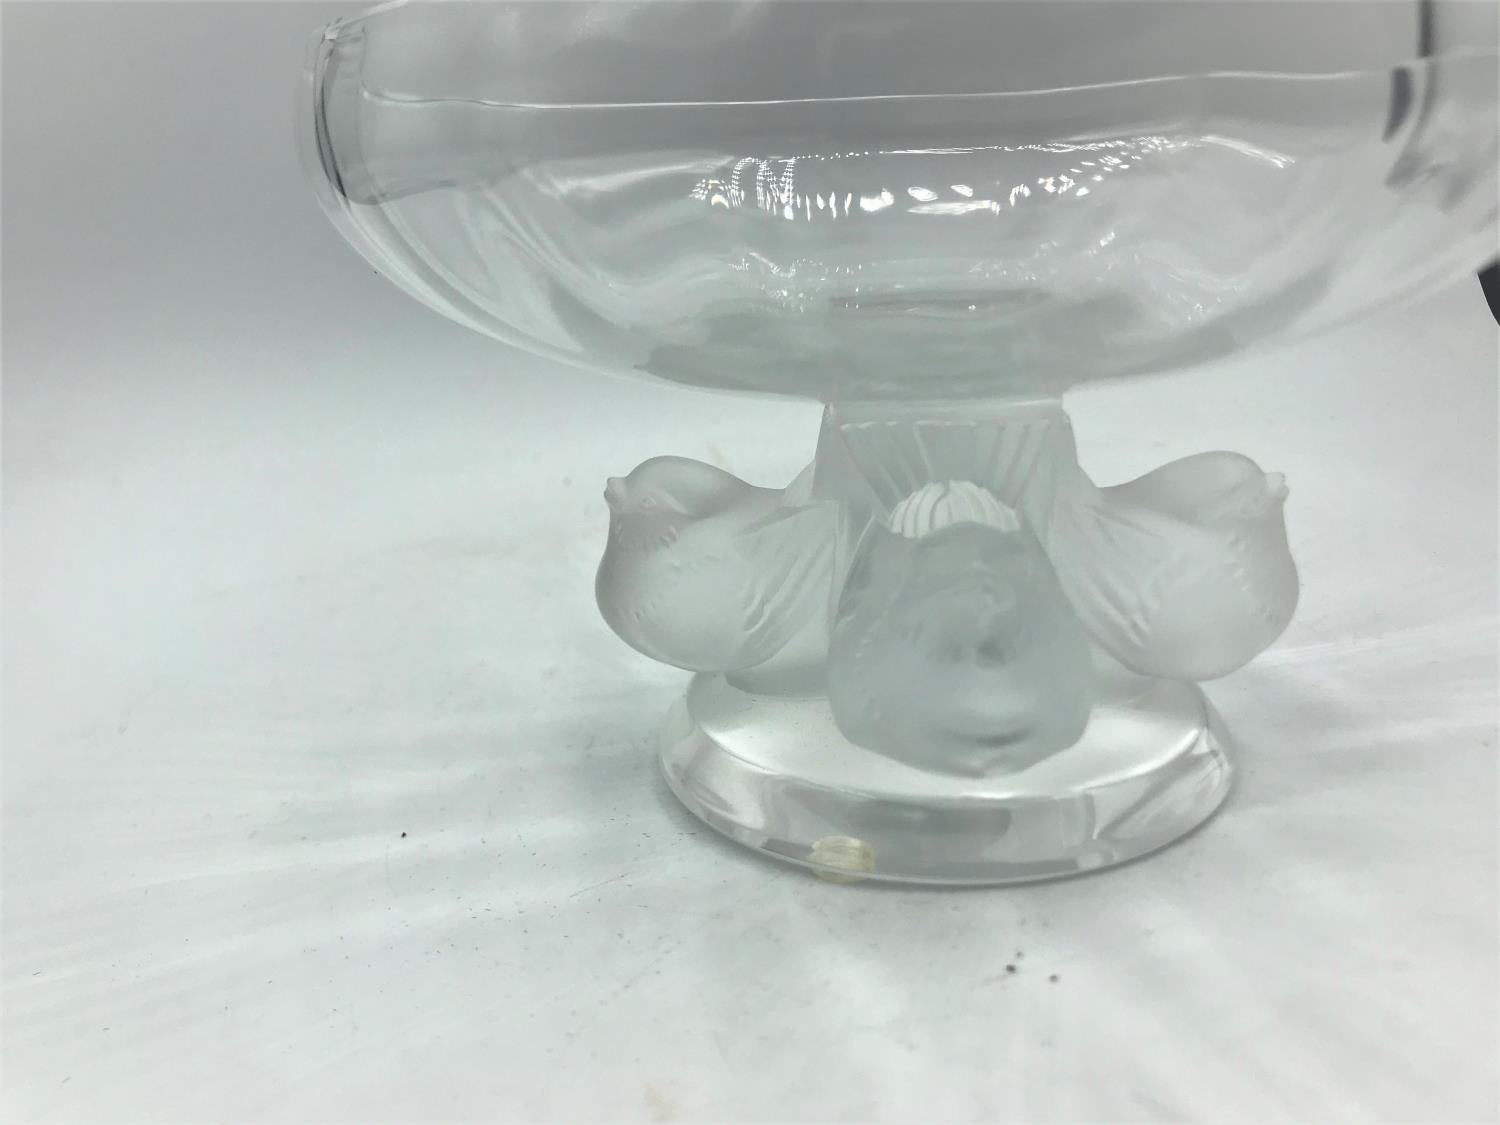 Lalique glass bowl (J0490) with 4 birds on stem and clear Lalique France marking, weight 592g and - Image 4 of 4